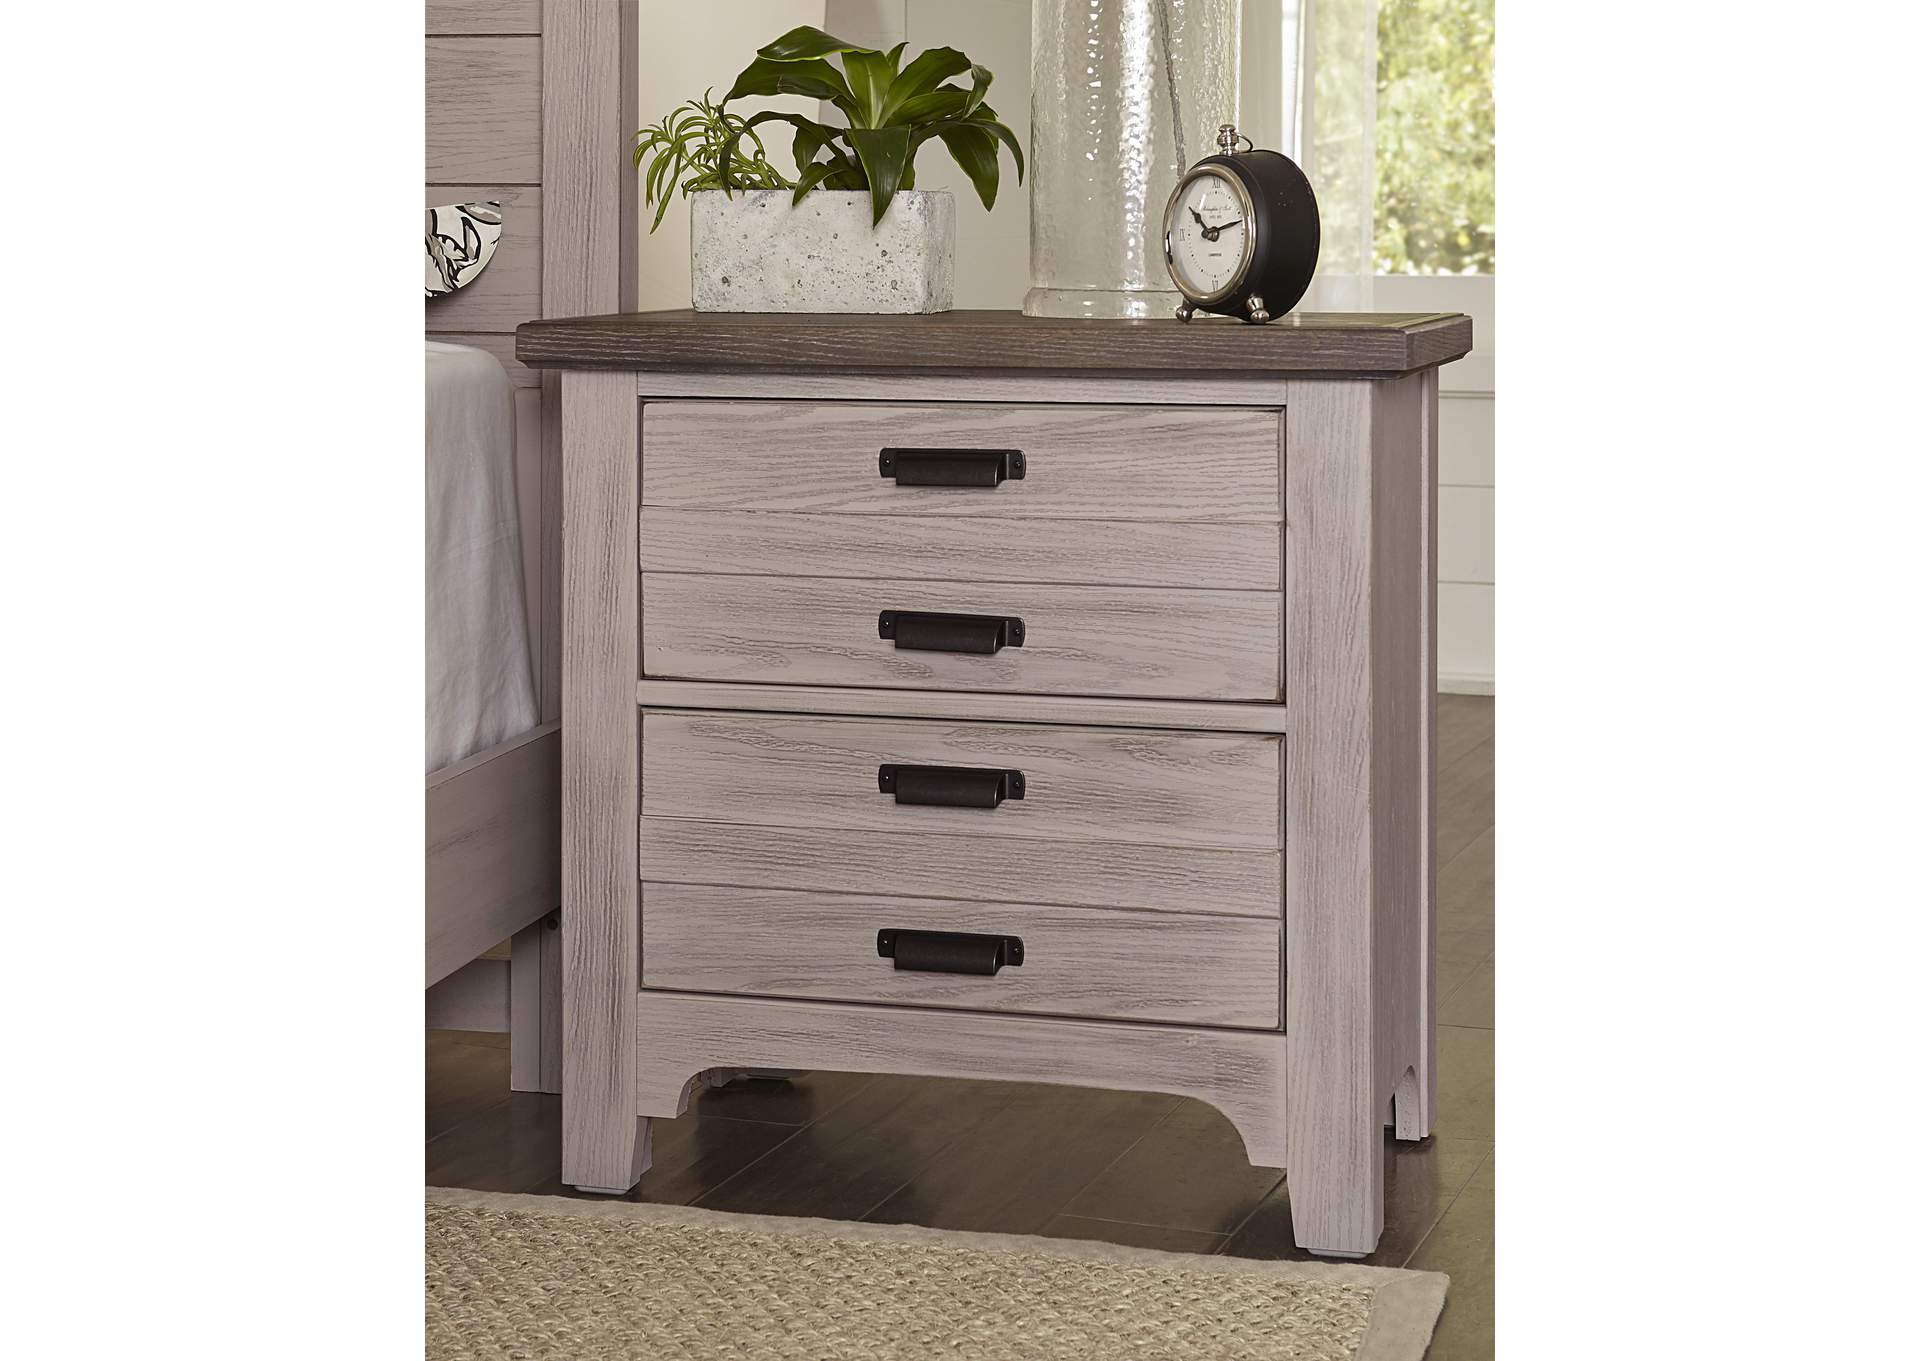 Bungalow Dover Grey with Folkstone Top Night Stand - 2 Drawer